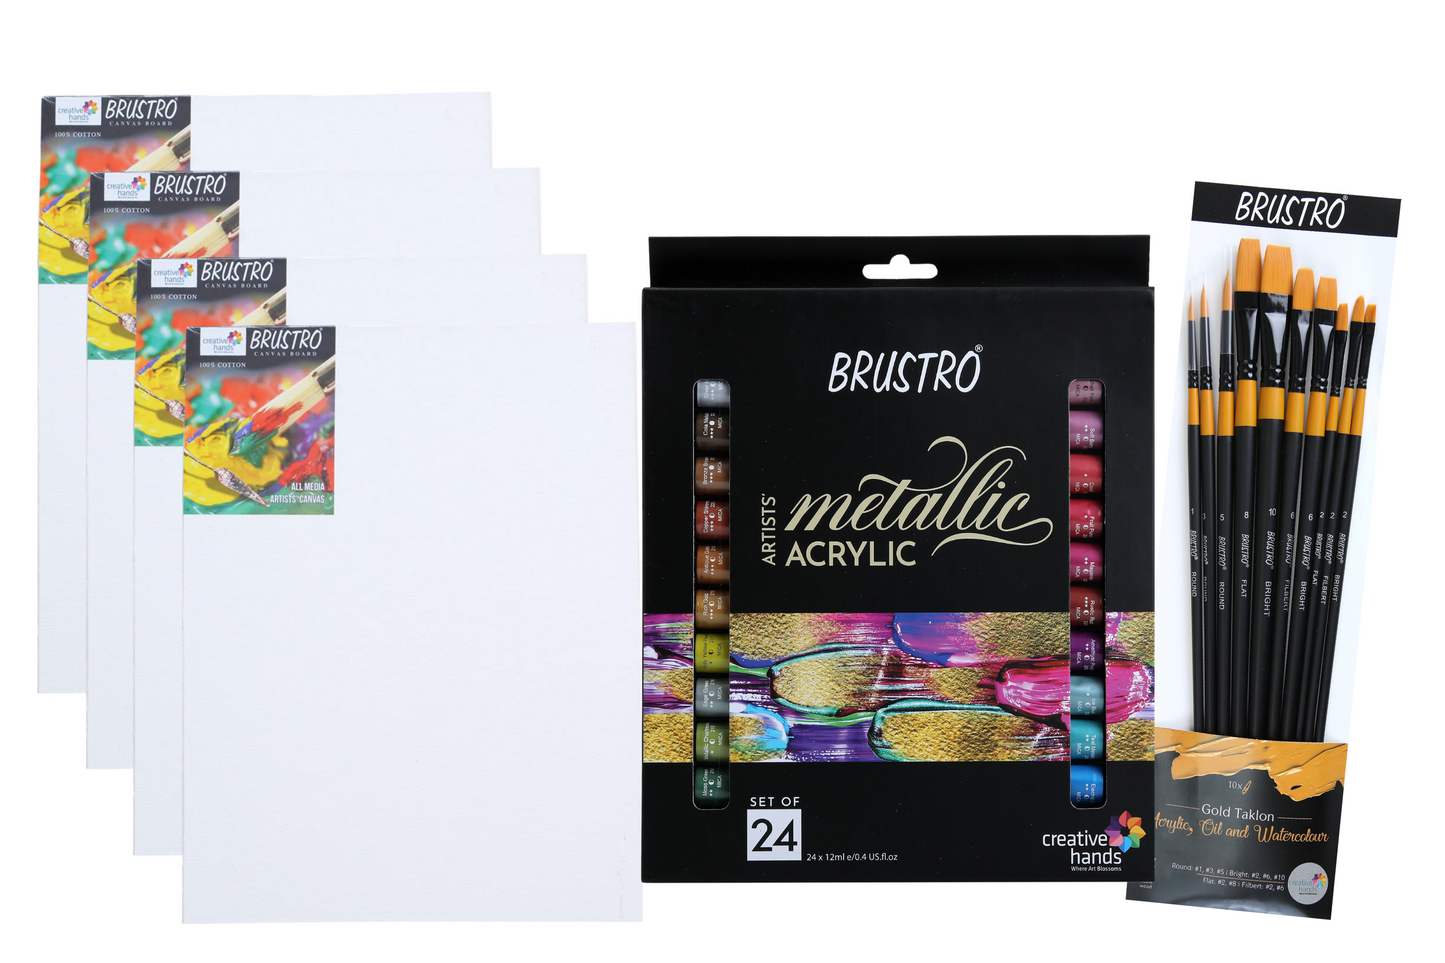 Brustro Artists’ Metallic Acrylic Set of 24 and Taklon Brush Set of 10 with 4 Canvas Boards